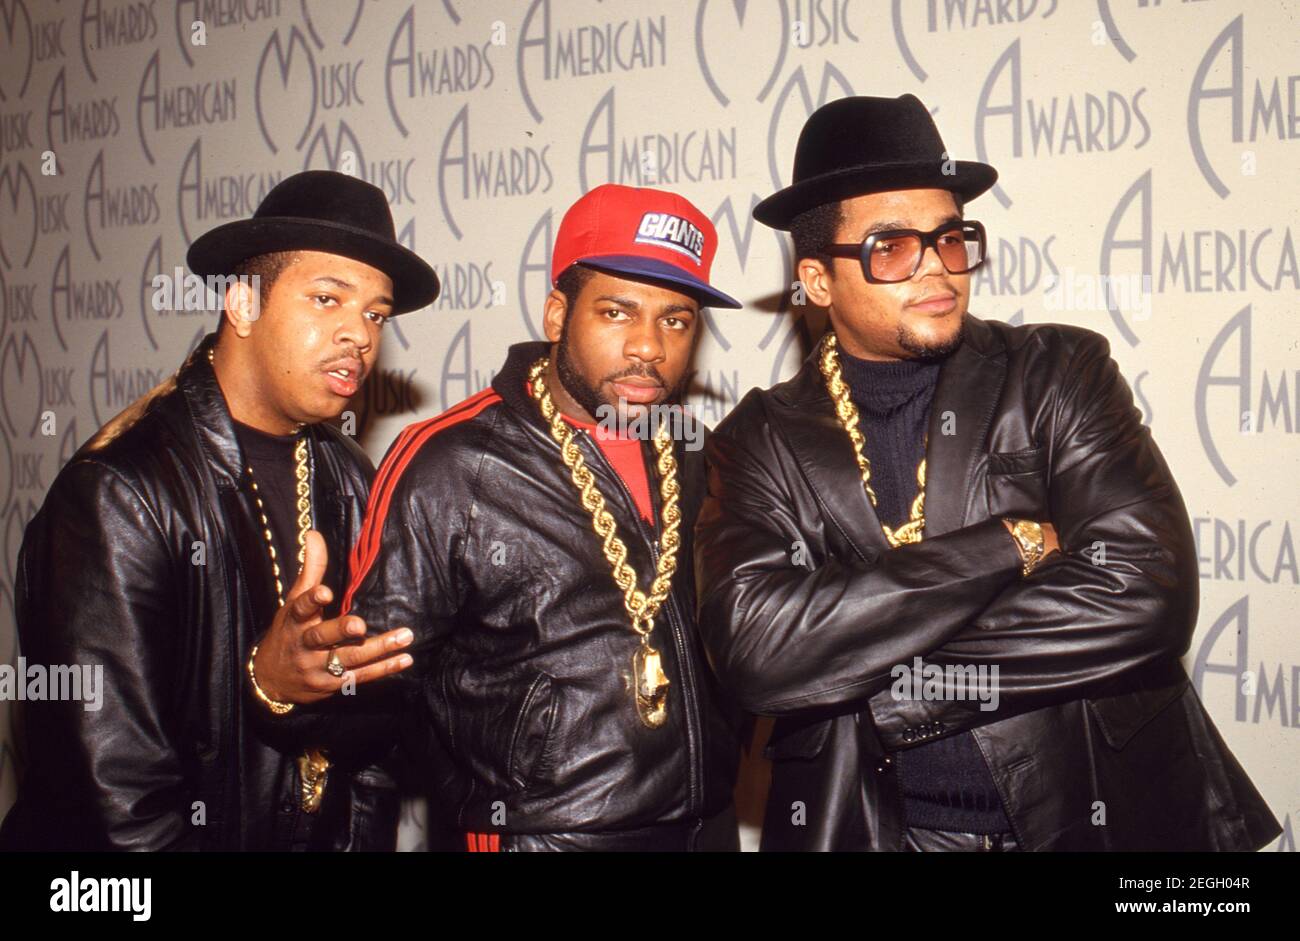 LOS ANGELES - JANUARY 26: Reverend Run, Jam Master Jay and Darryl McDaniels of  Run DMC  at the American Music Awards at the Shrine Auditorium on January 26, 1987 in Los Angeles, California.   Credit: Ralph Dominguez/MediaPunch Stock Photo